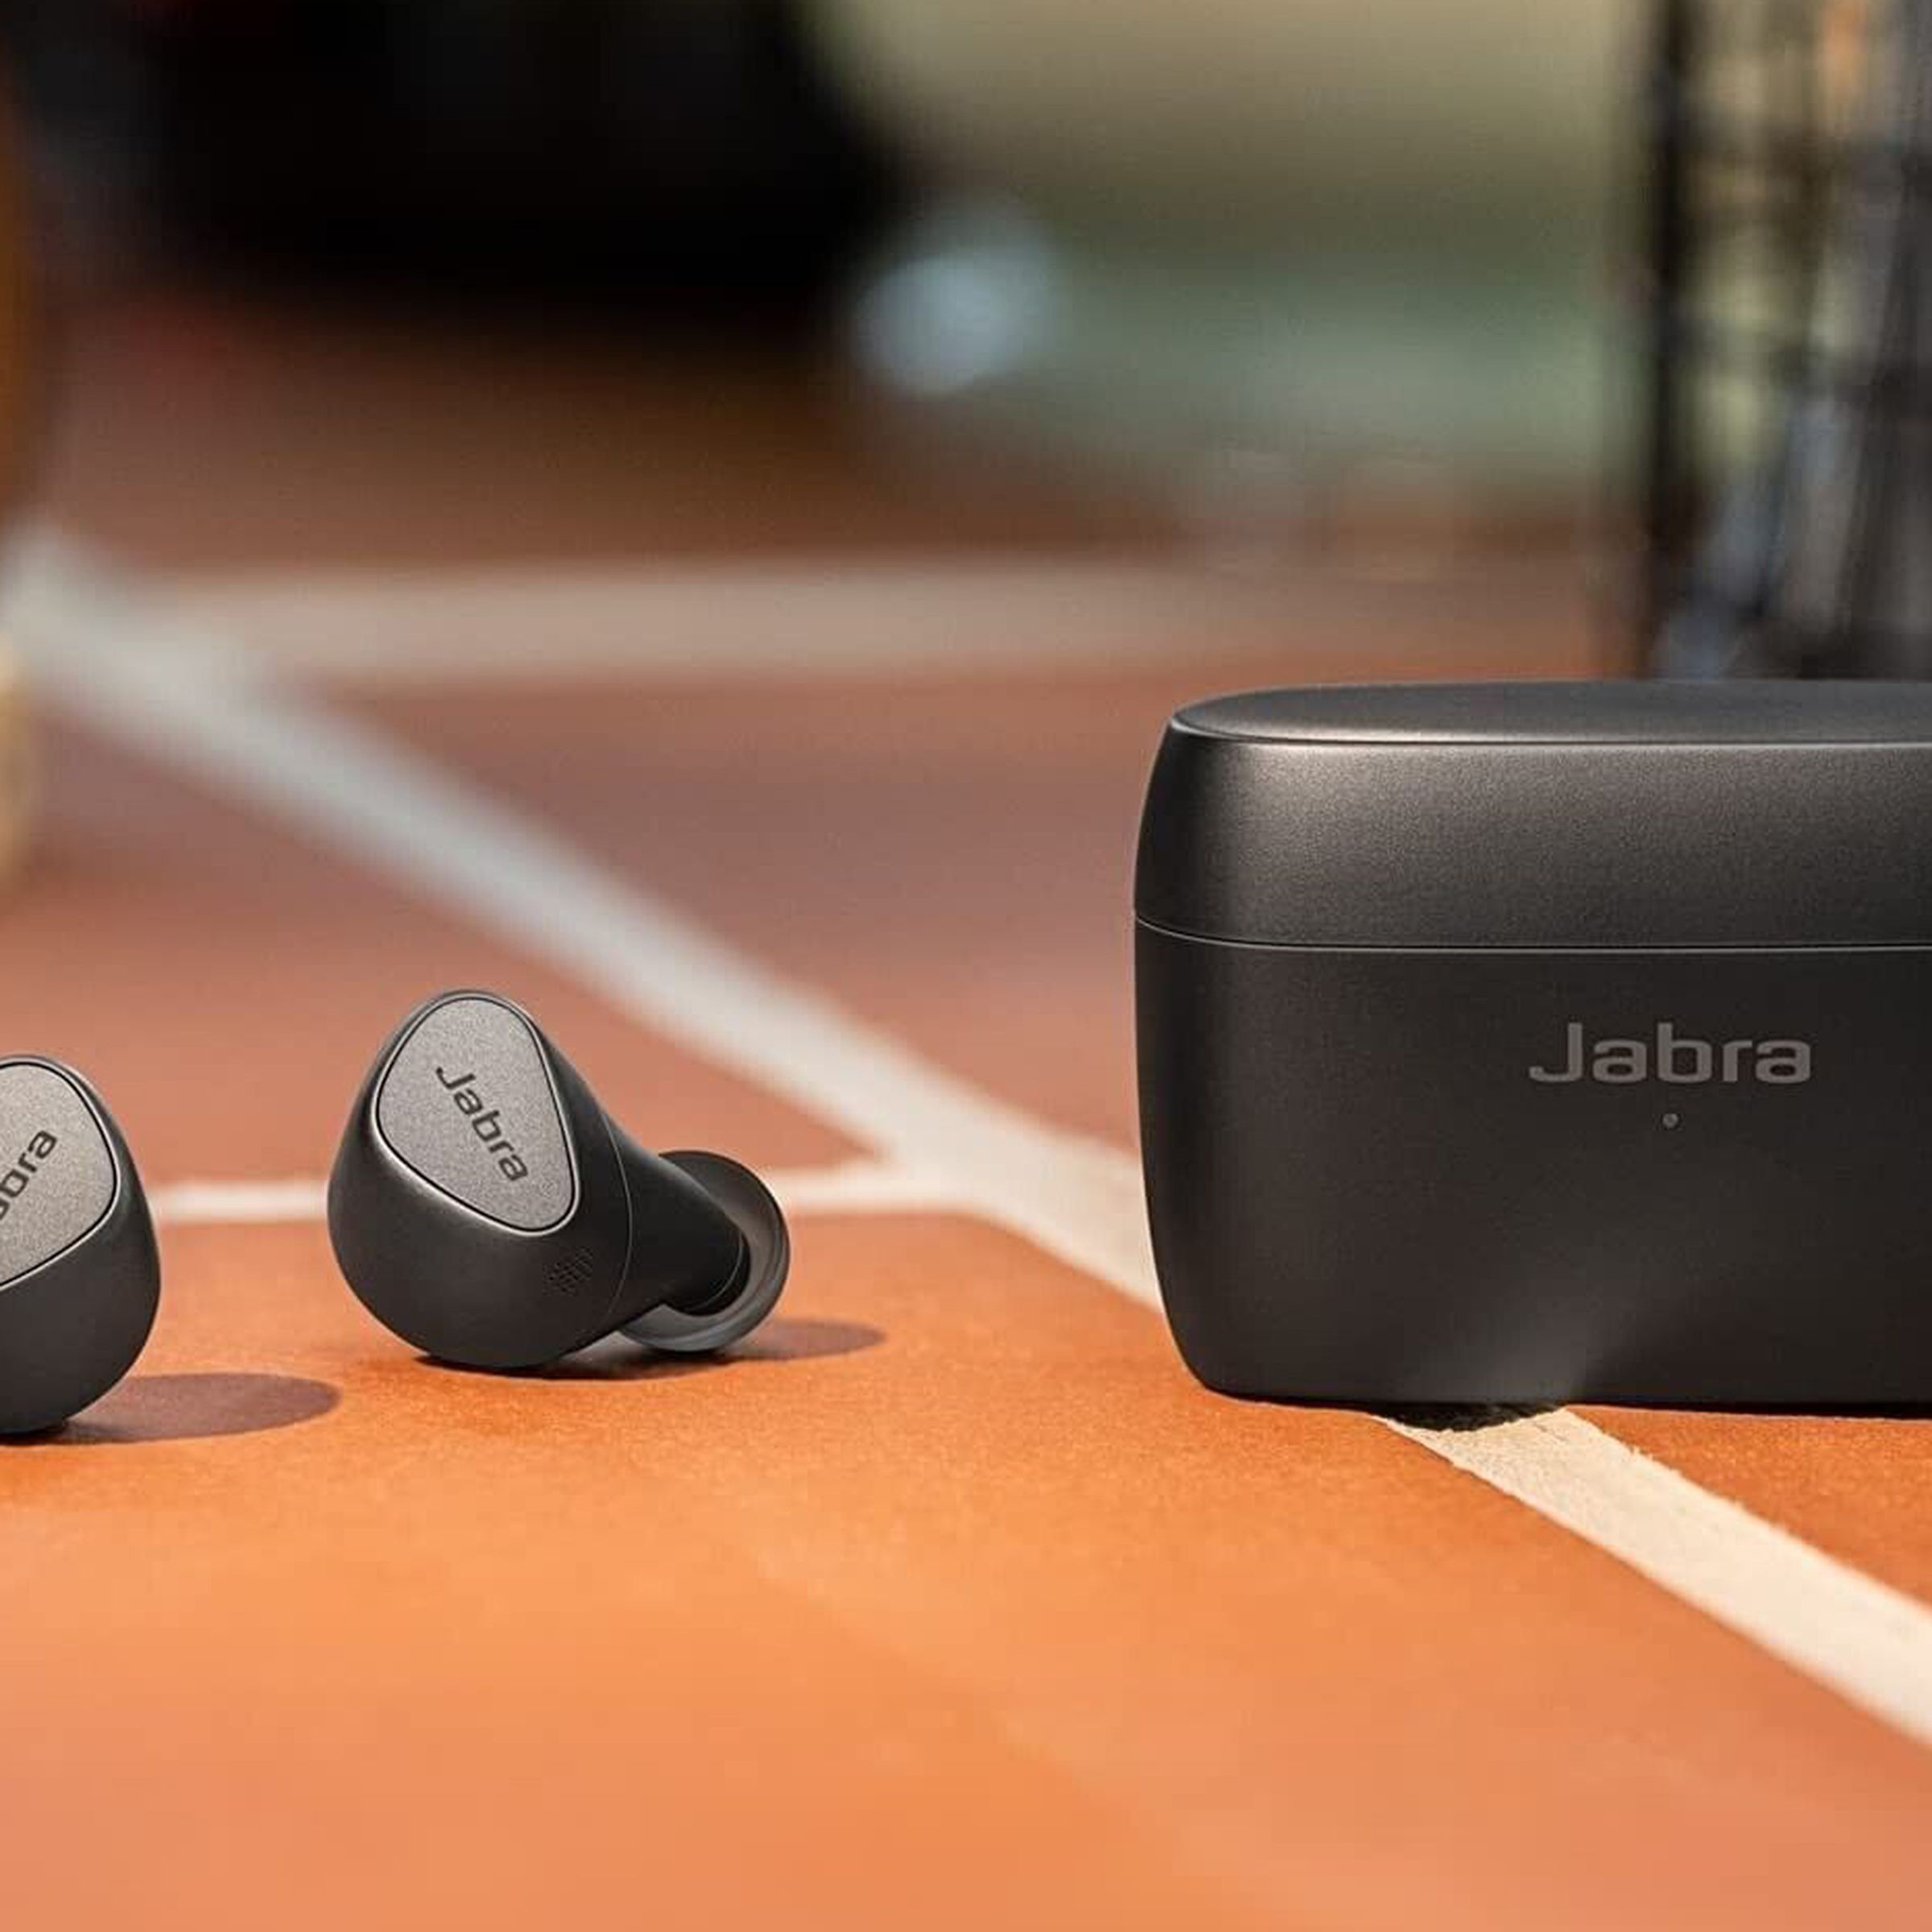 A black pair of the Jabra Elite 5 earbuds sitting beside their case on a red, tiled floor.